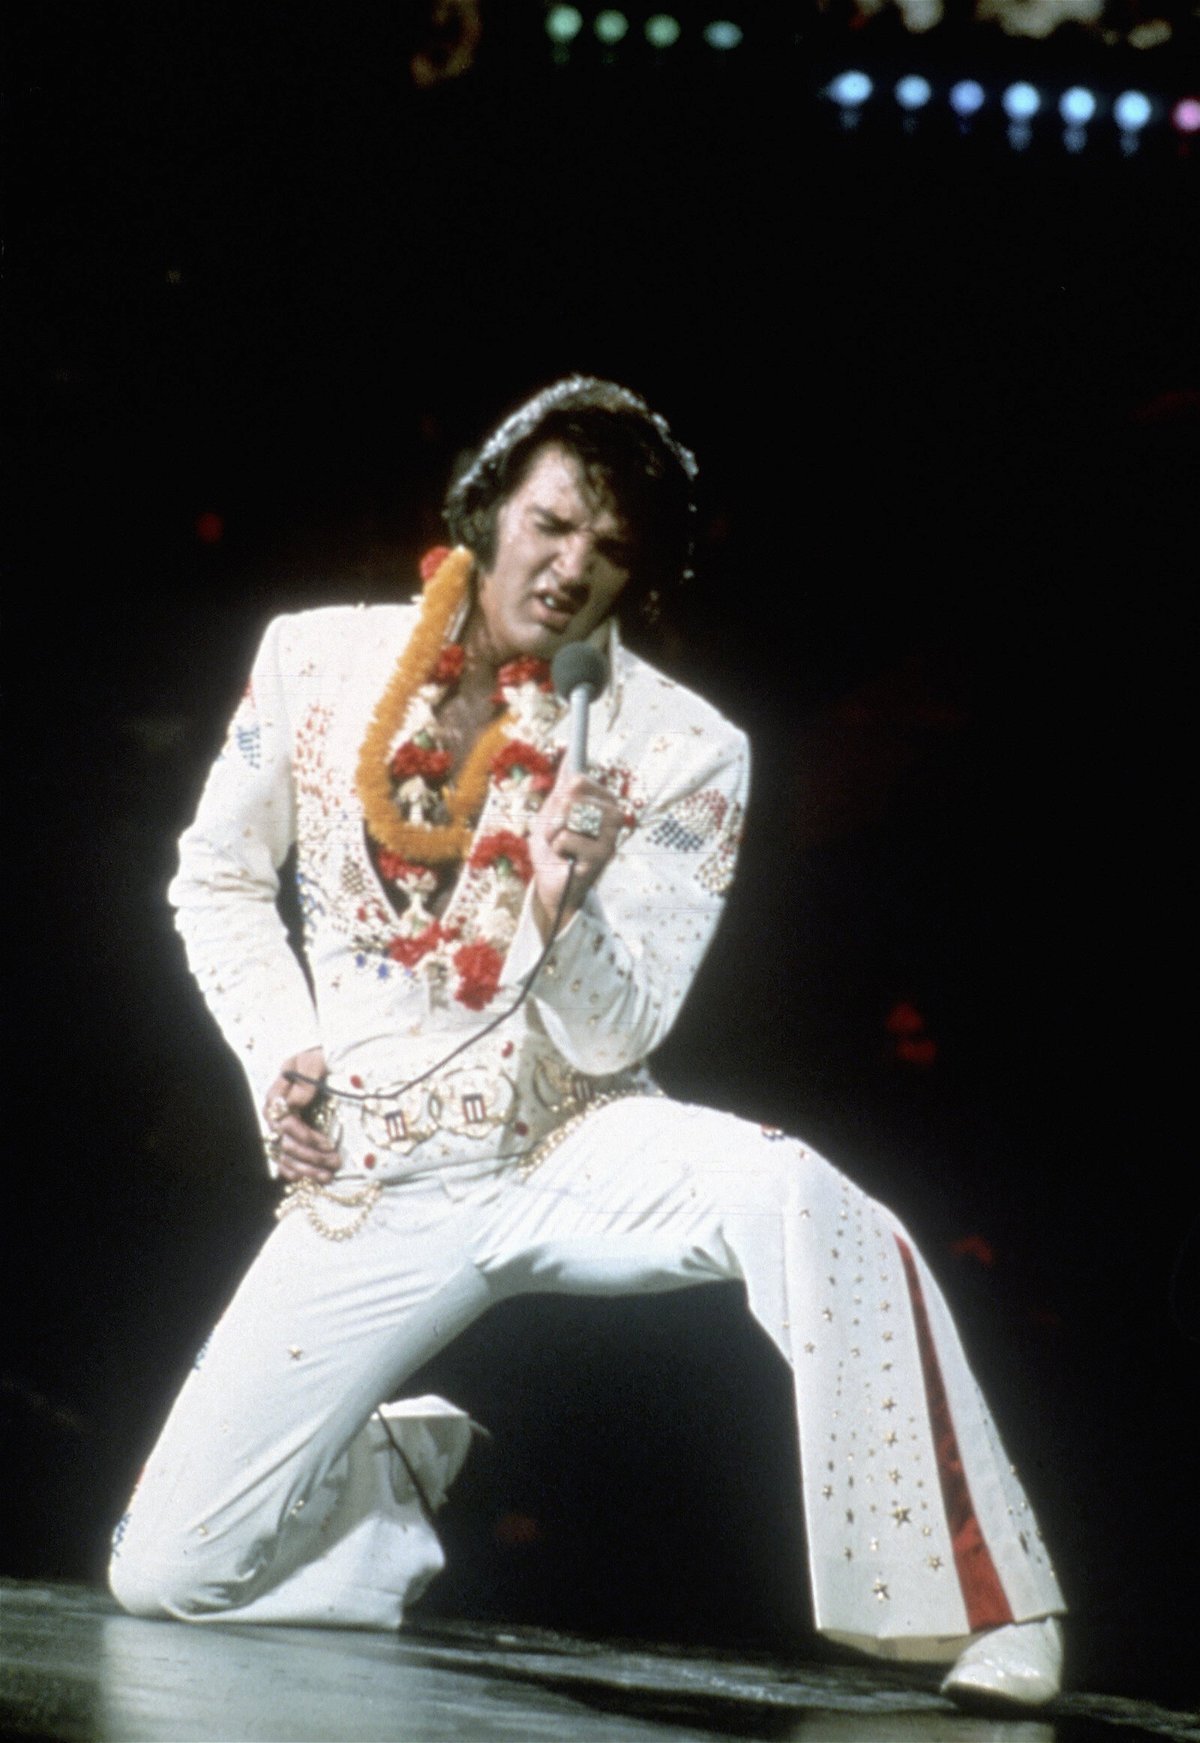 <i>Michael Ochs Archives/Getty Images</i><br/>Elvis Presley performs onstage at  the International Convention Center in Honolulu Hawaii in January 1973.